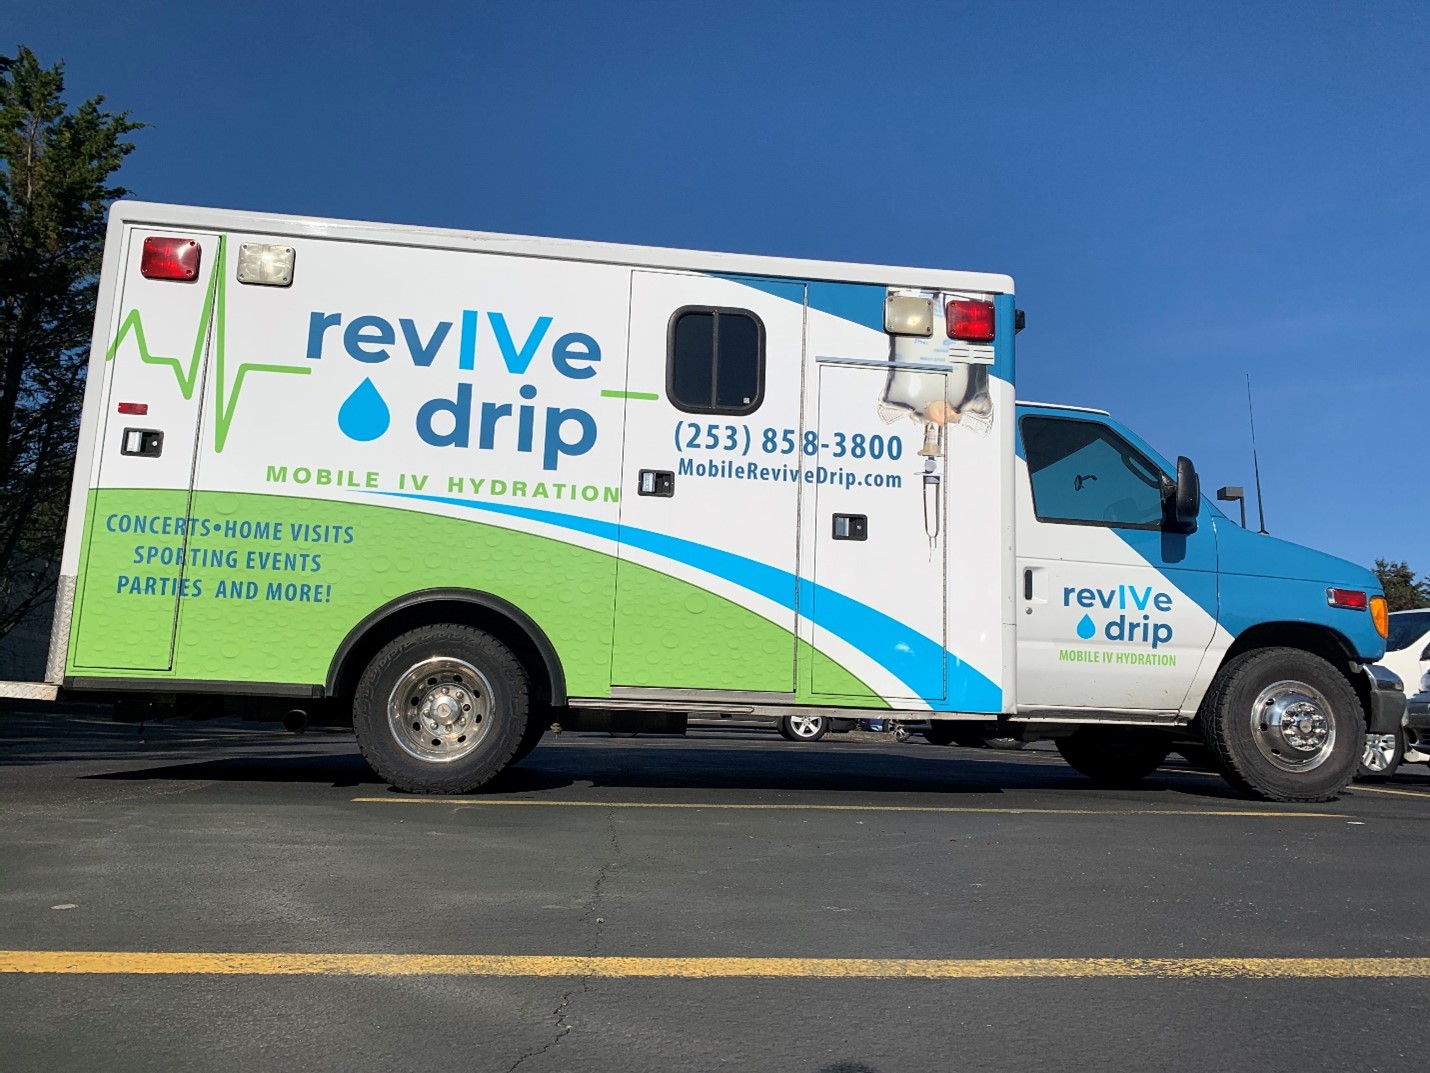 Revive Drip Clinic in Gig Harbor